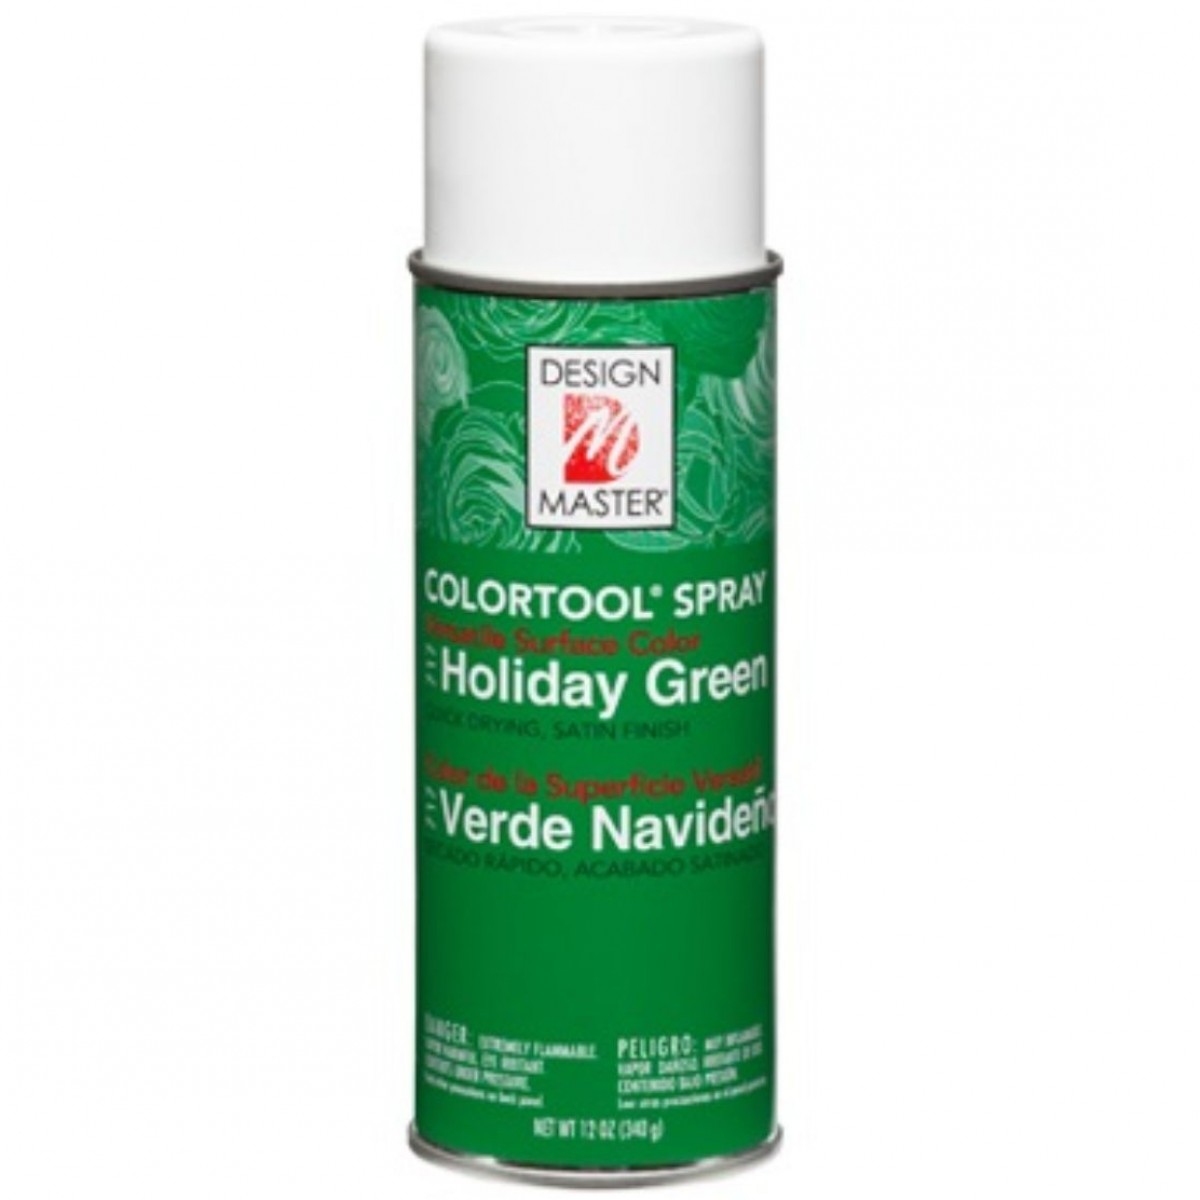 717 Holiday Green DM Colour Spray Paint - 1 No